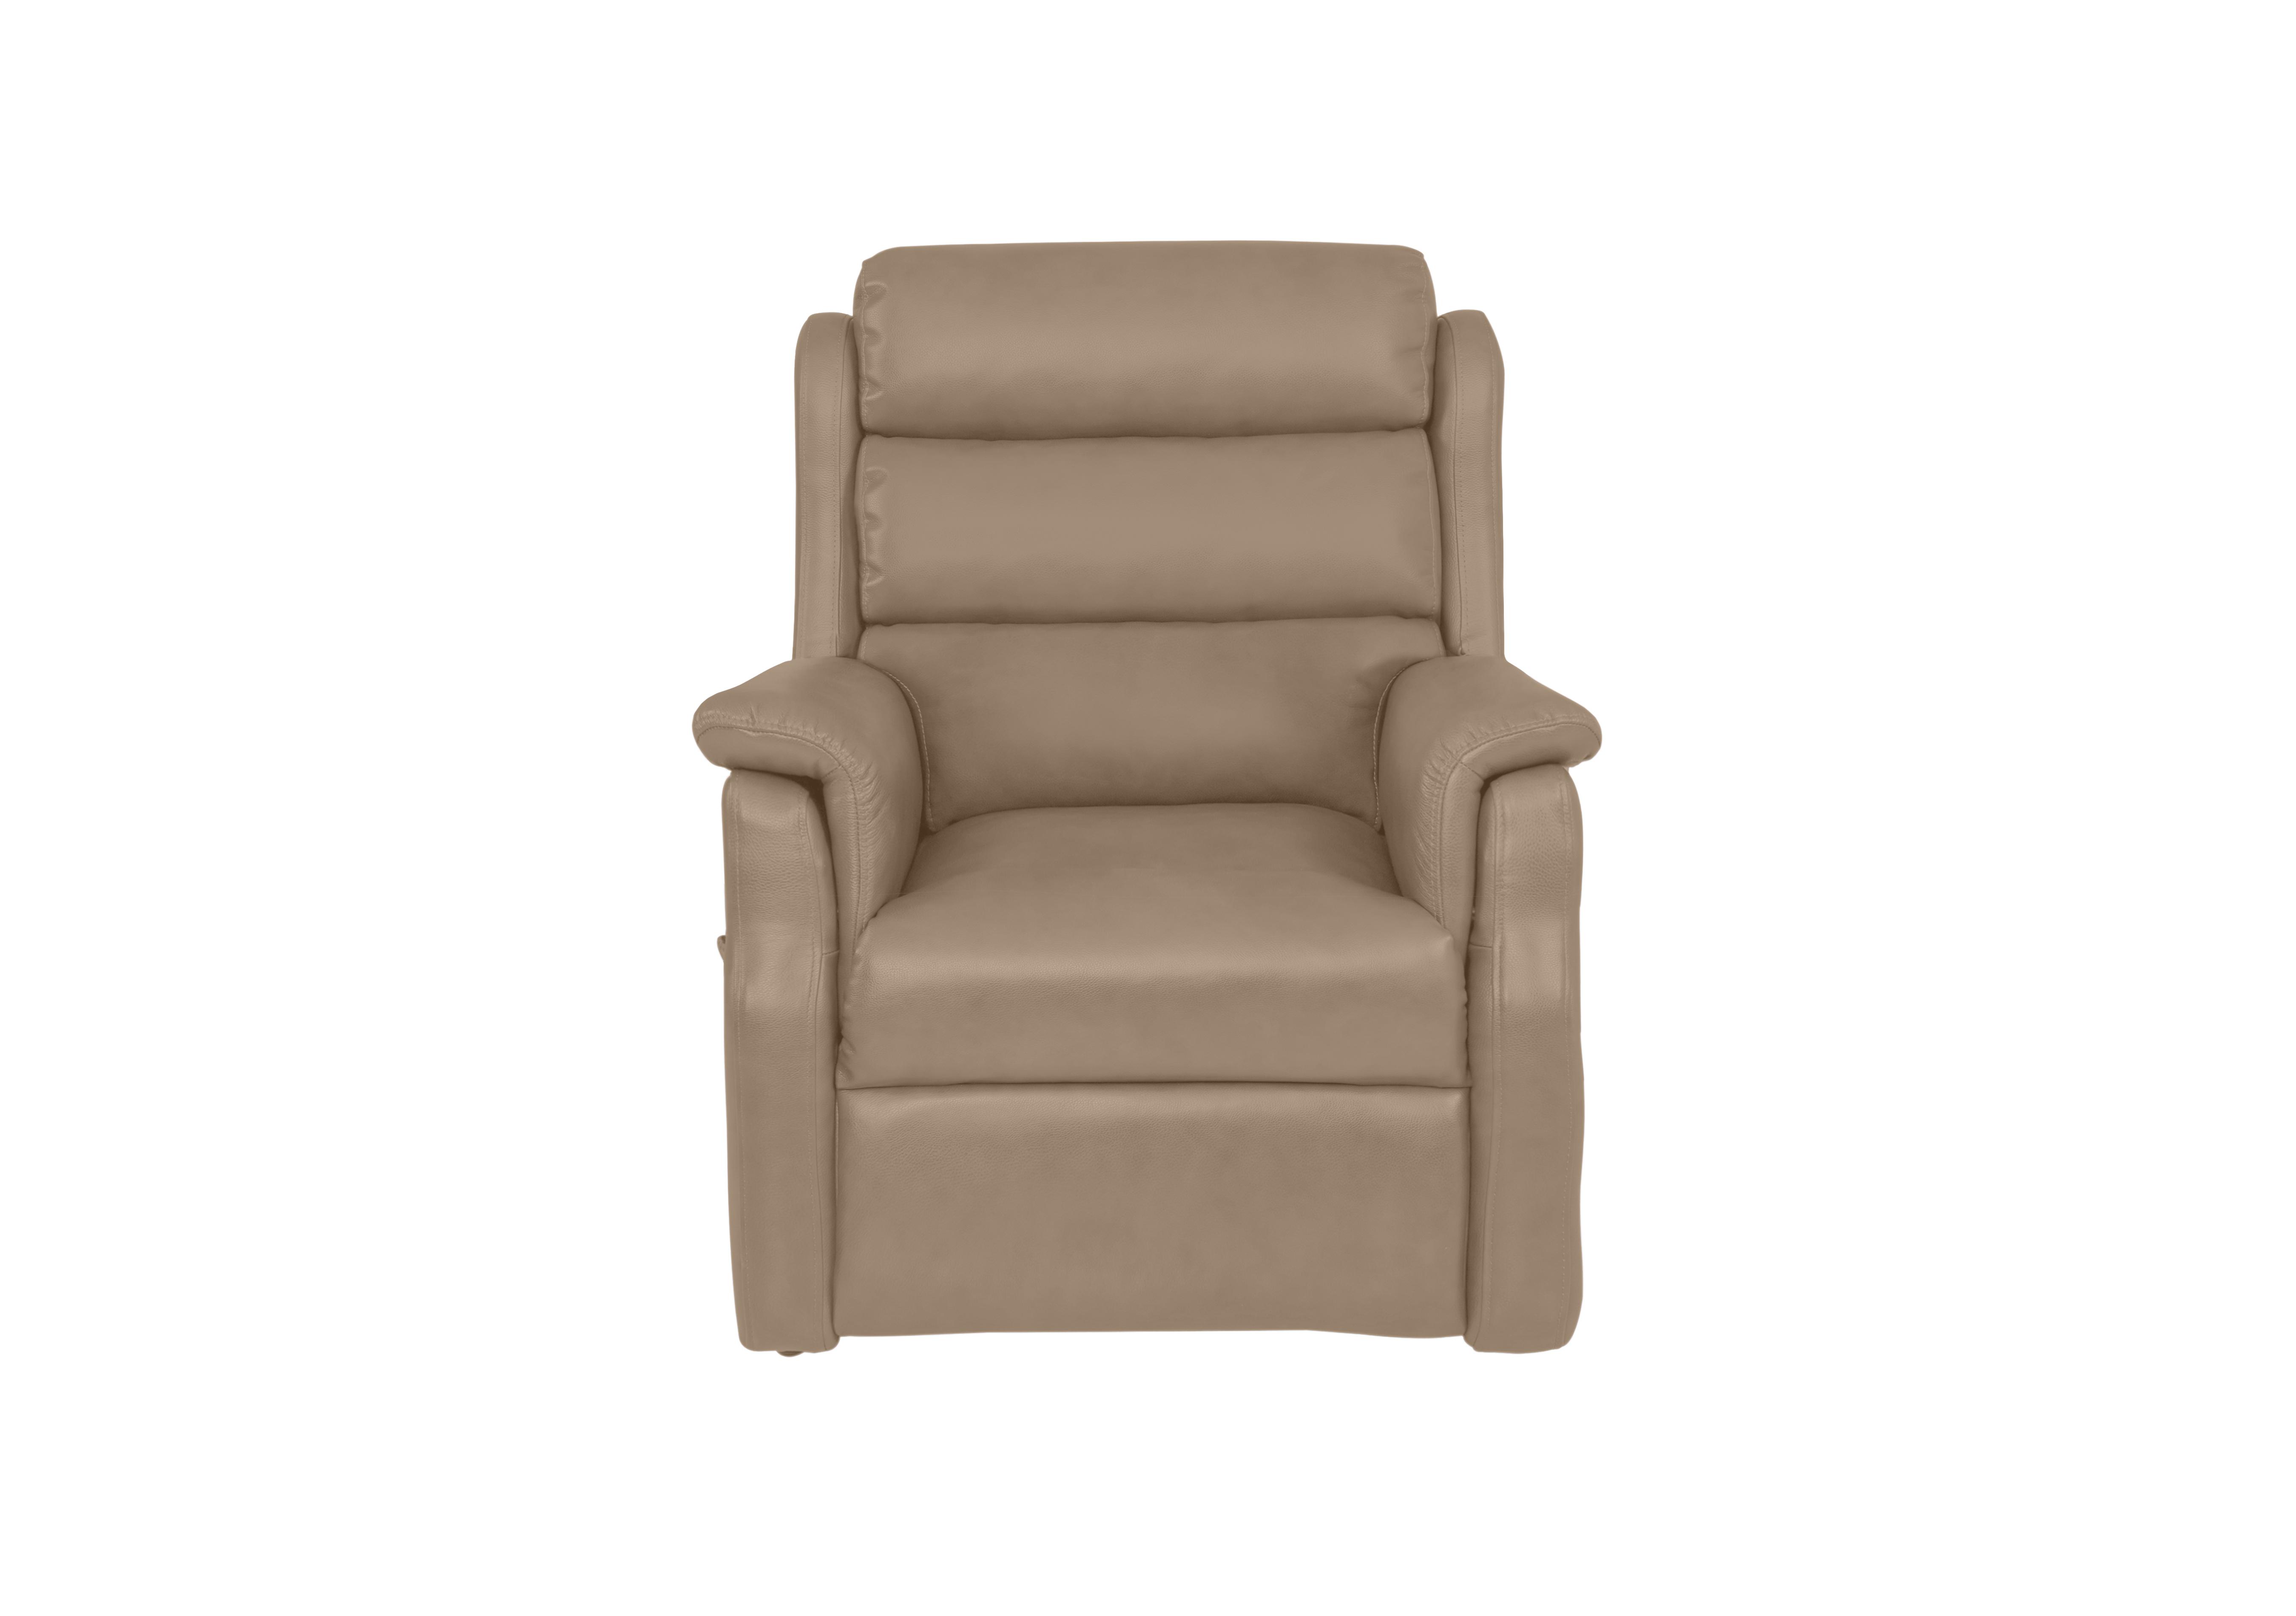 My Chair McCoy Leather Lift and Rise Chair in Cat-60/06 Montana Barley on Furniture Village